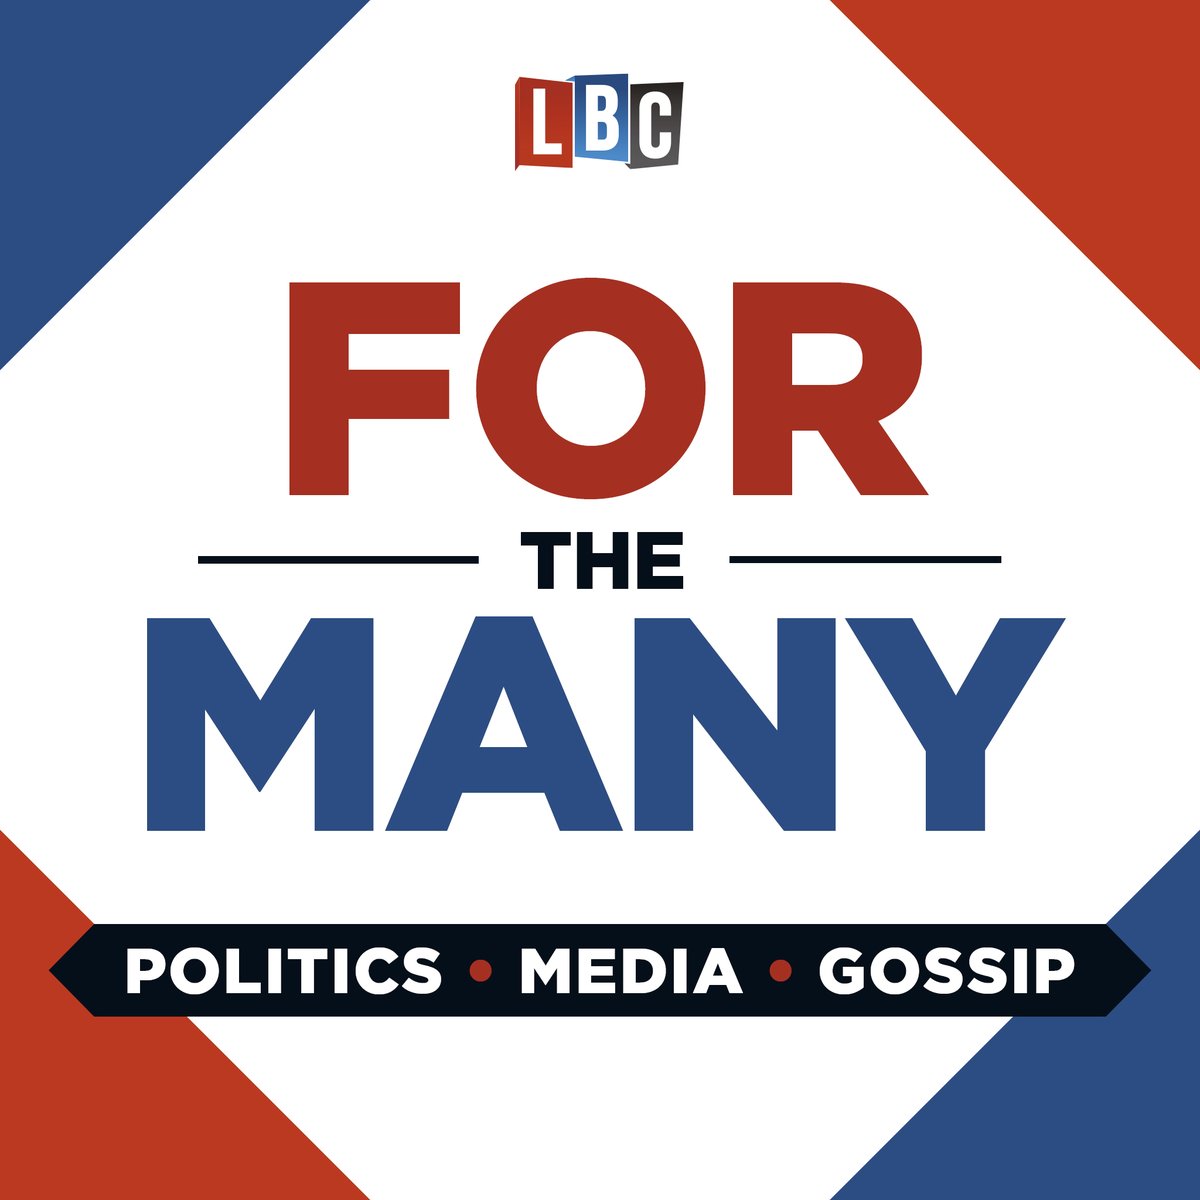 NEW EPISODE OF THE FOR THE MANY PODCAST 445. Sloppy Seconds: Cross Party Friendships @Jacqui_Smith1 and I explain the benefits and challenges of having friends from a different political party! We also answer lots of listener questions. Listen podcasts.apple.com/gb/podcast/445…